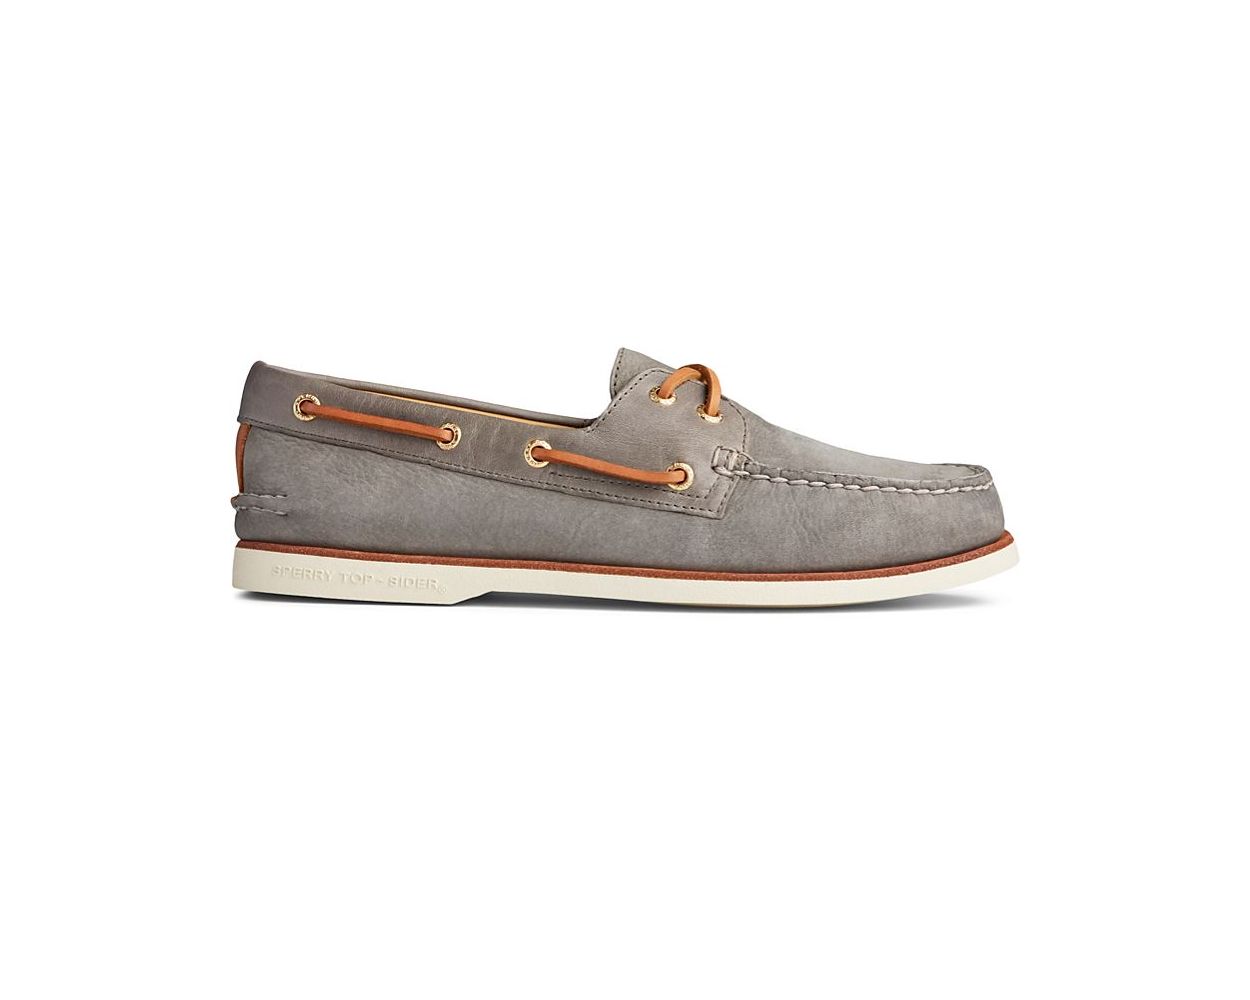 Sperry Top-Sider Men's Gold Seaside Boat Shoes Brown 